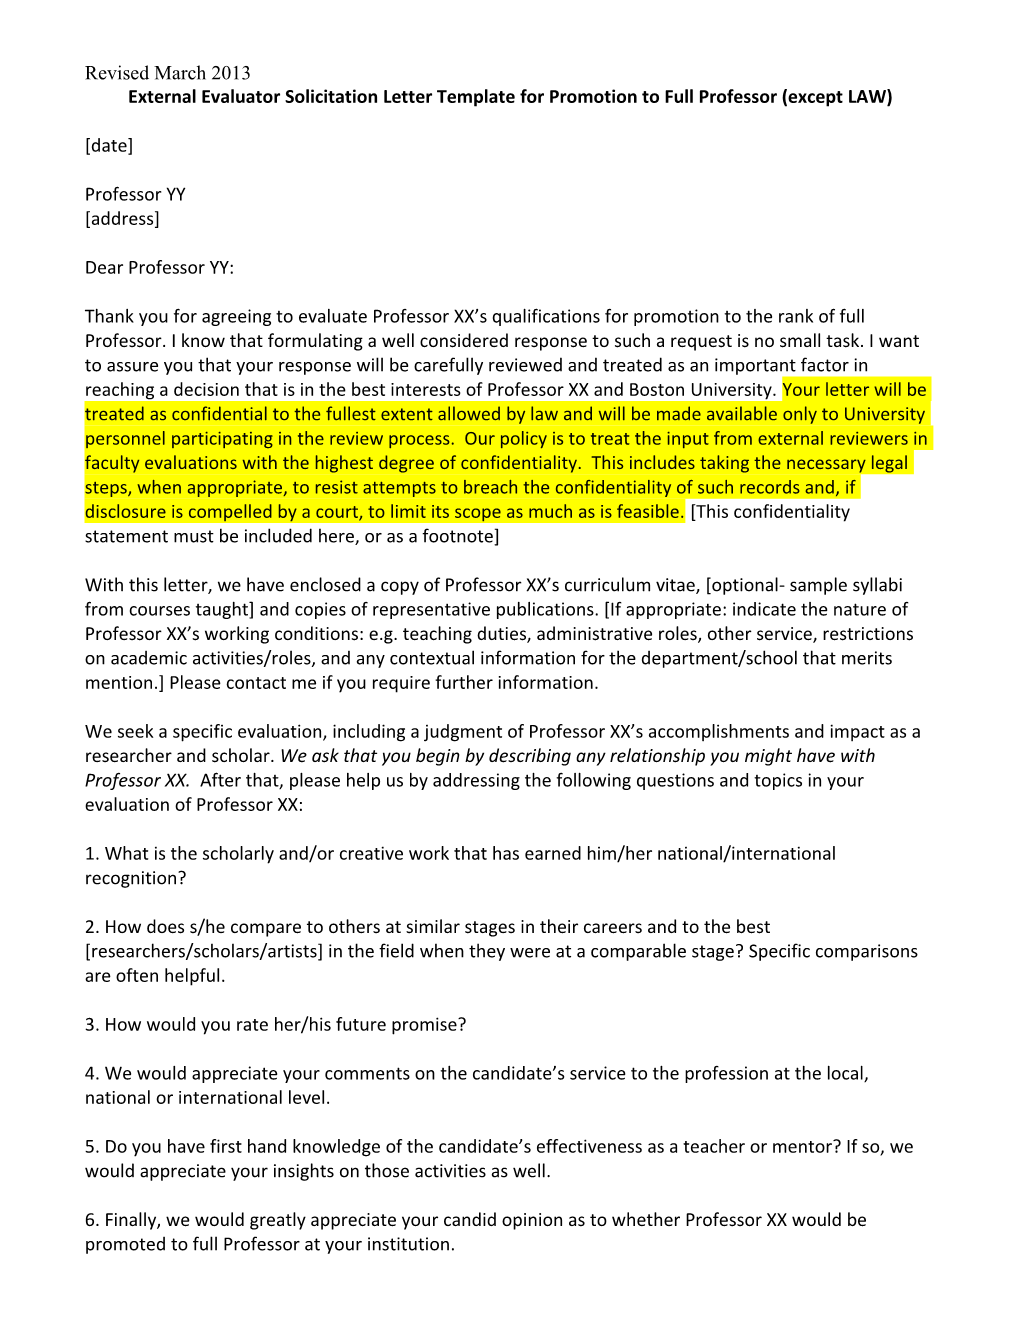 External Evaluator Solicitation Letter Template for Promotion to Full Professor (Except LAW)